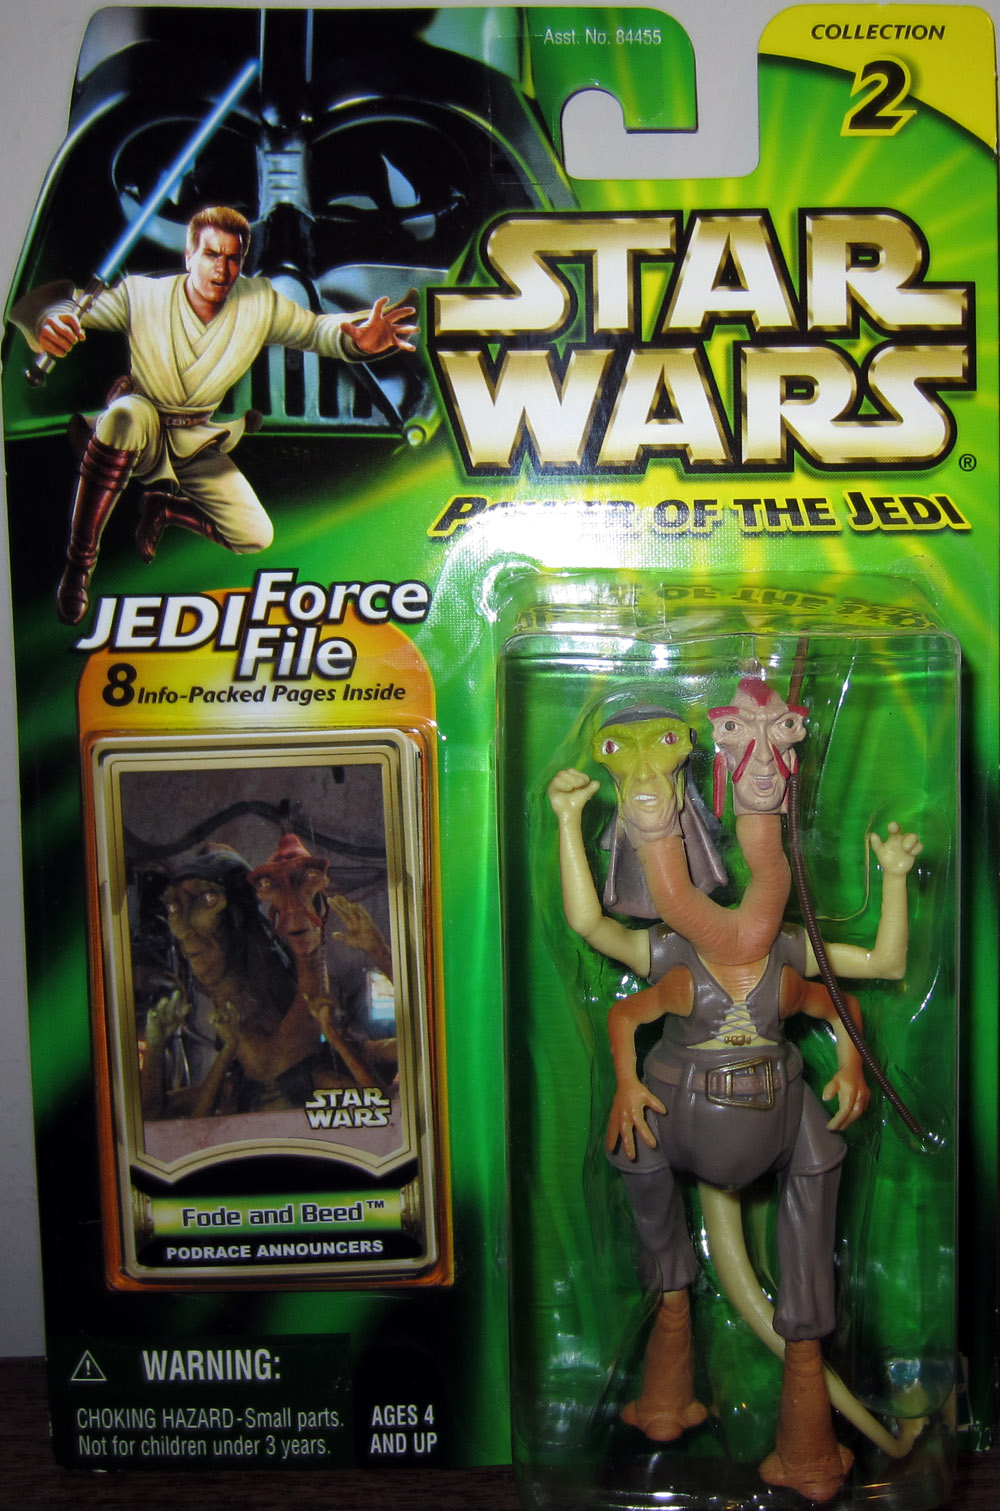 Star Wars Fode and Beed podrace announcers power of the jedi